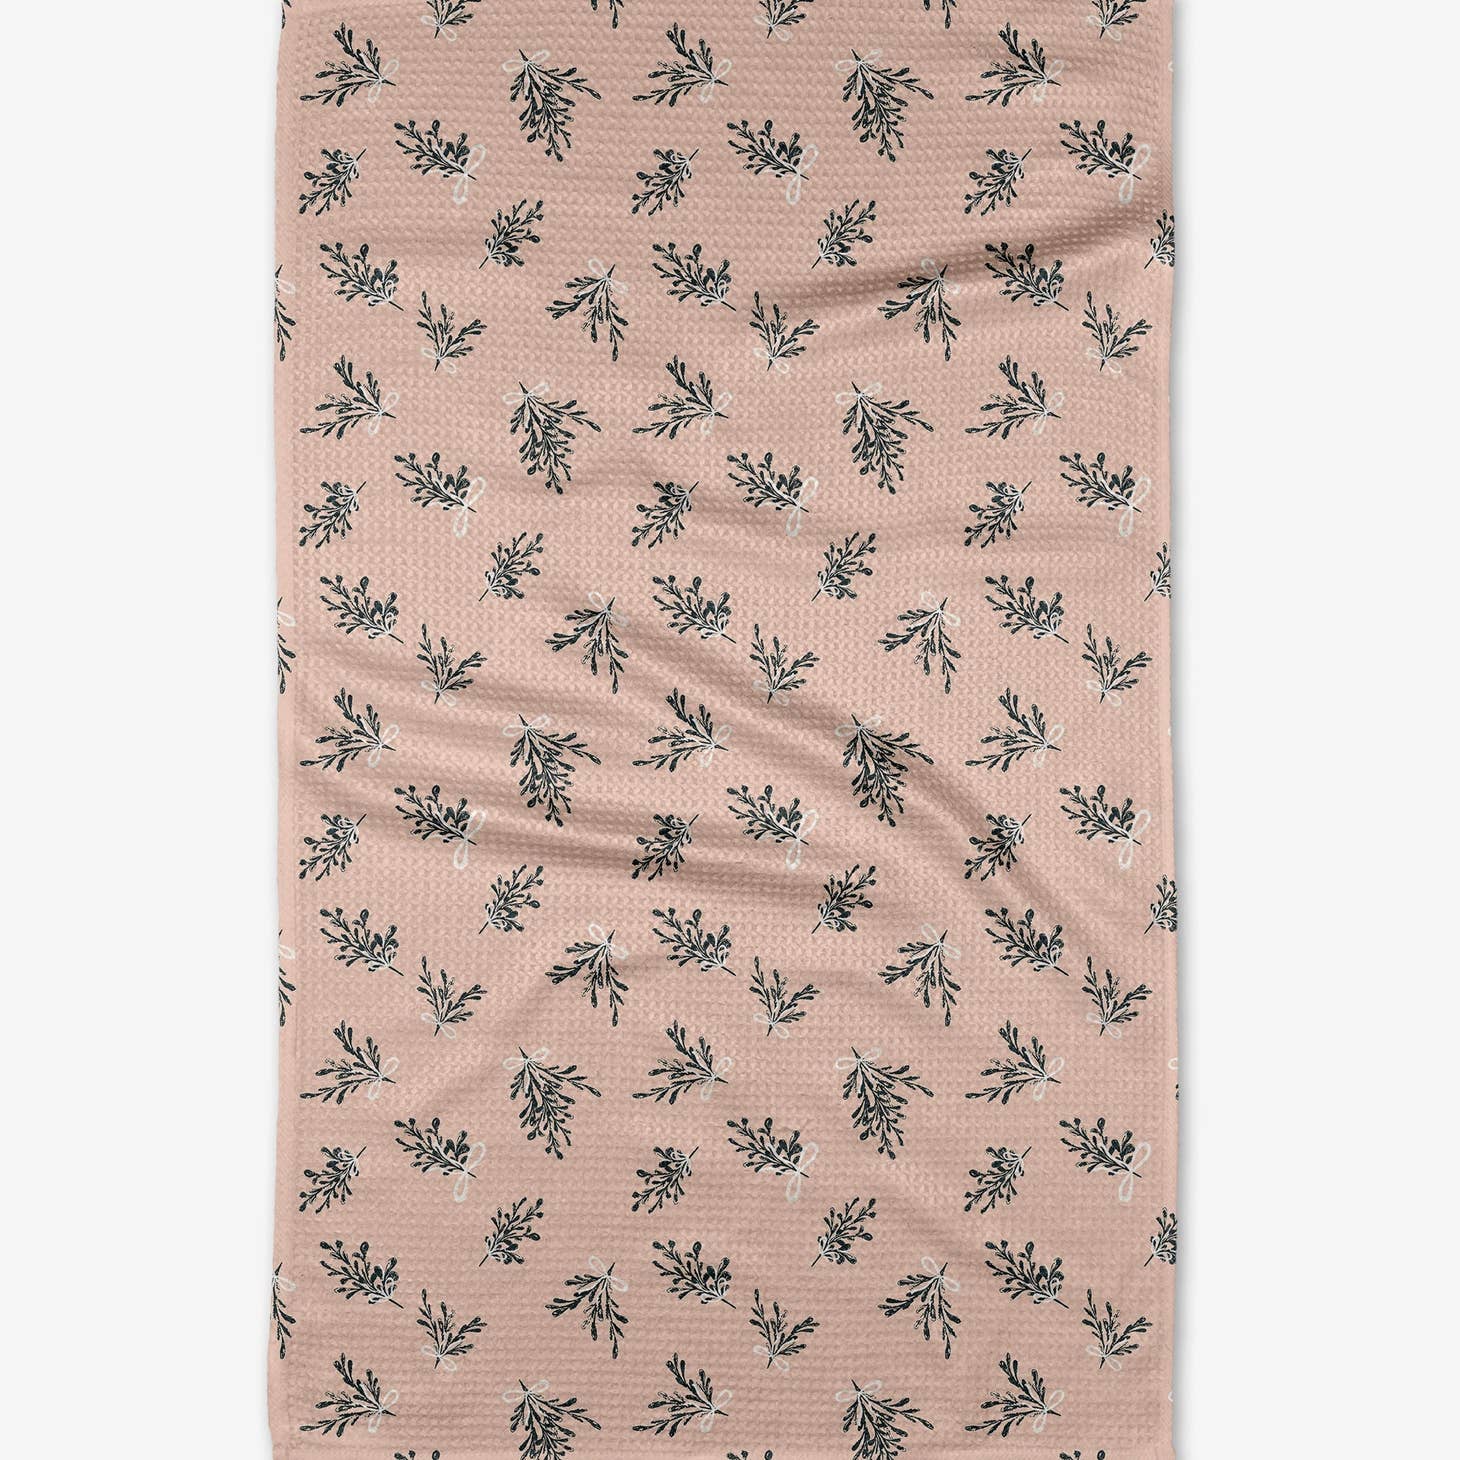 Geometry Boughs of Holly Kitchen Towel - Favorite Little Things Co